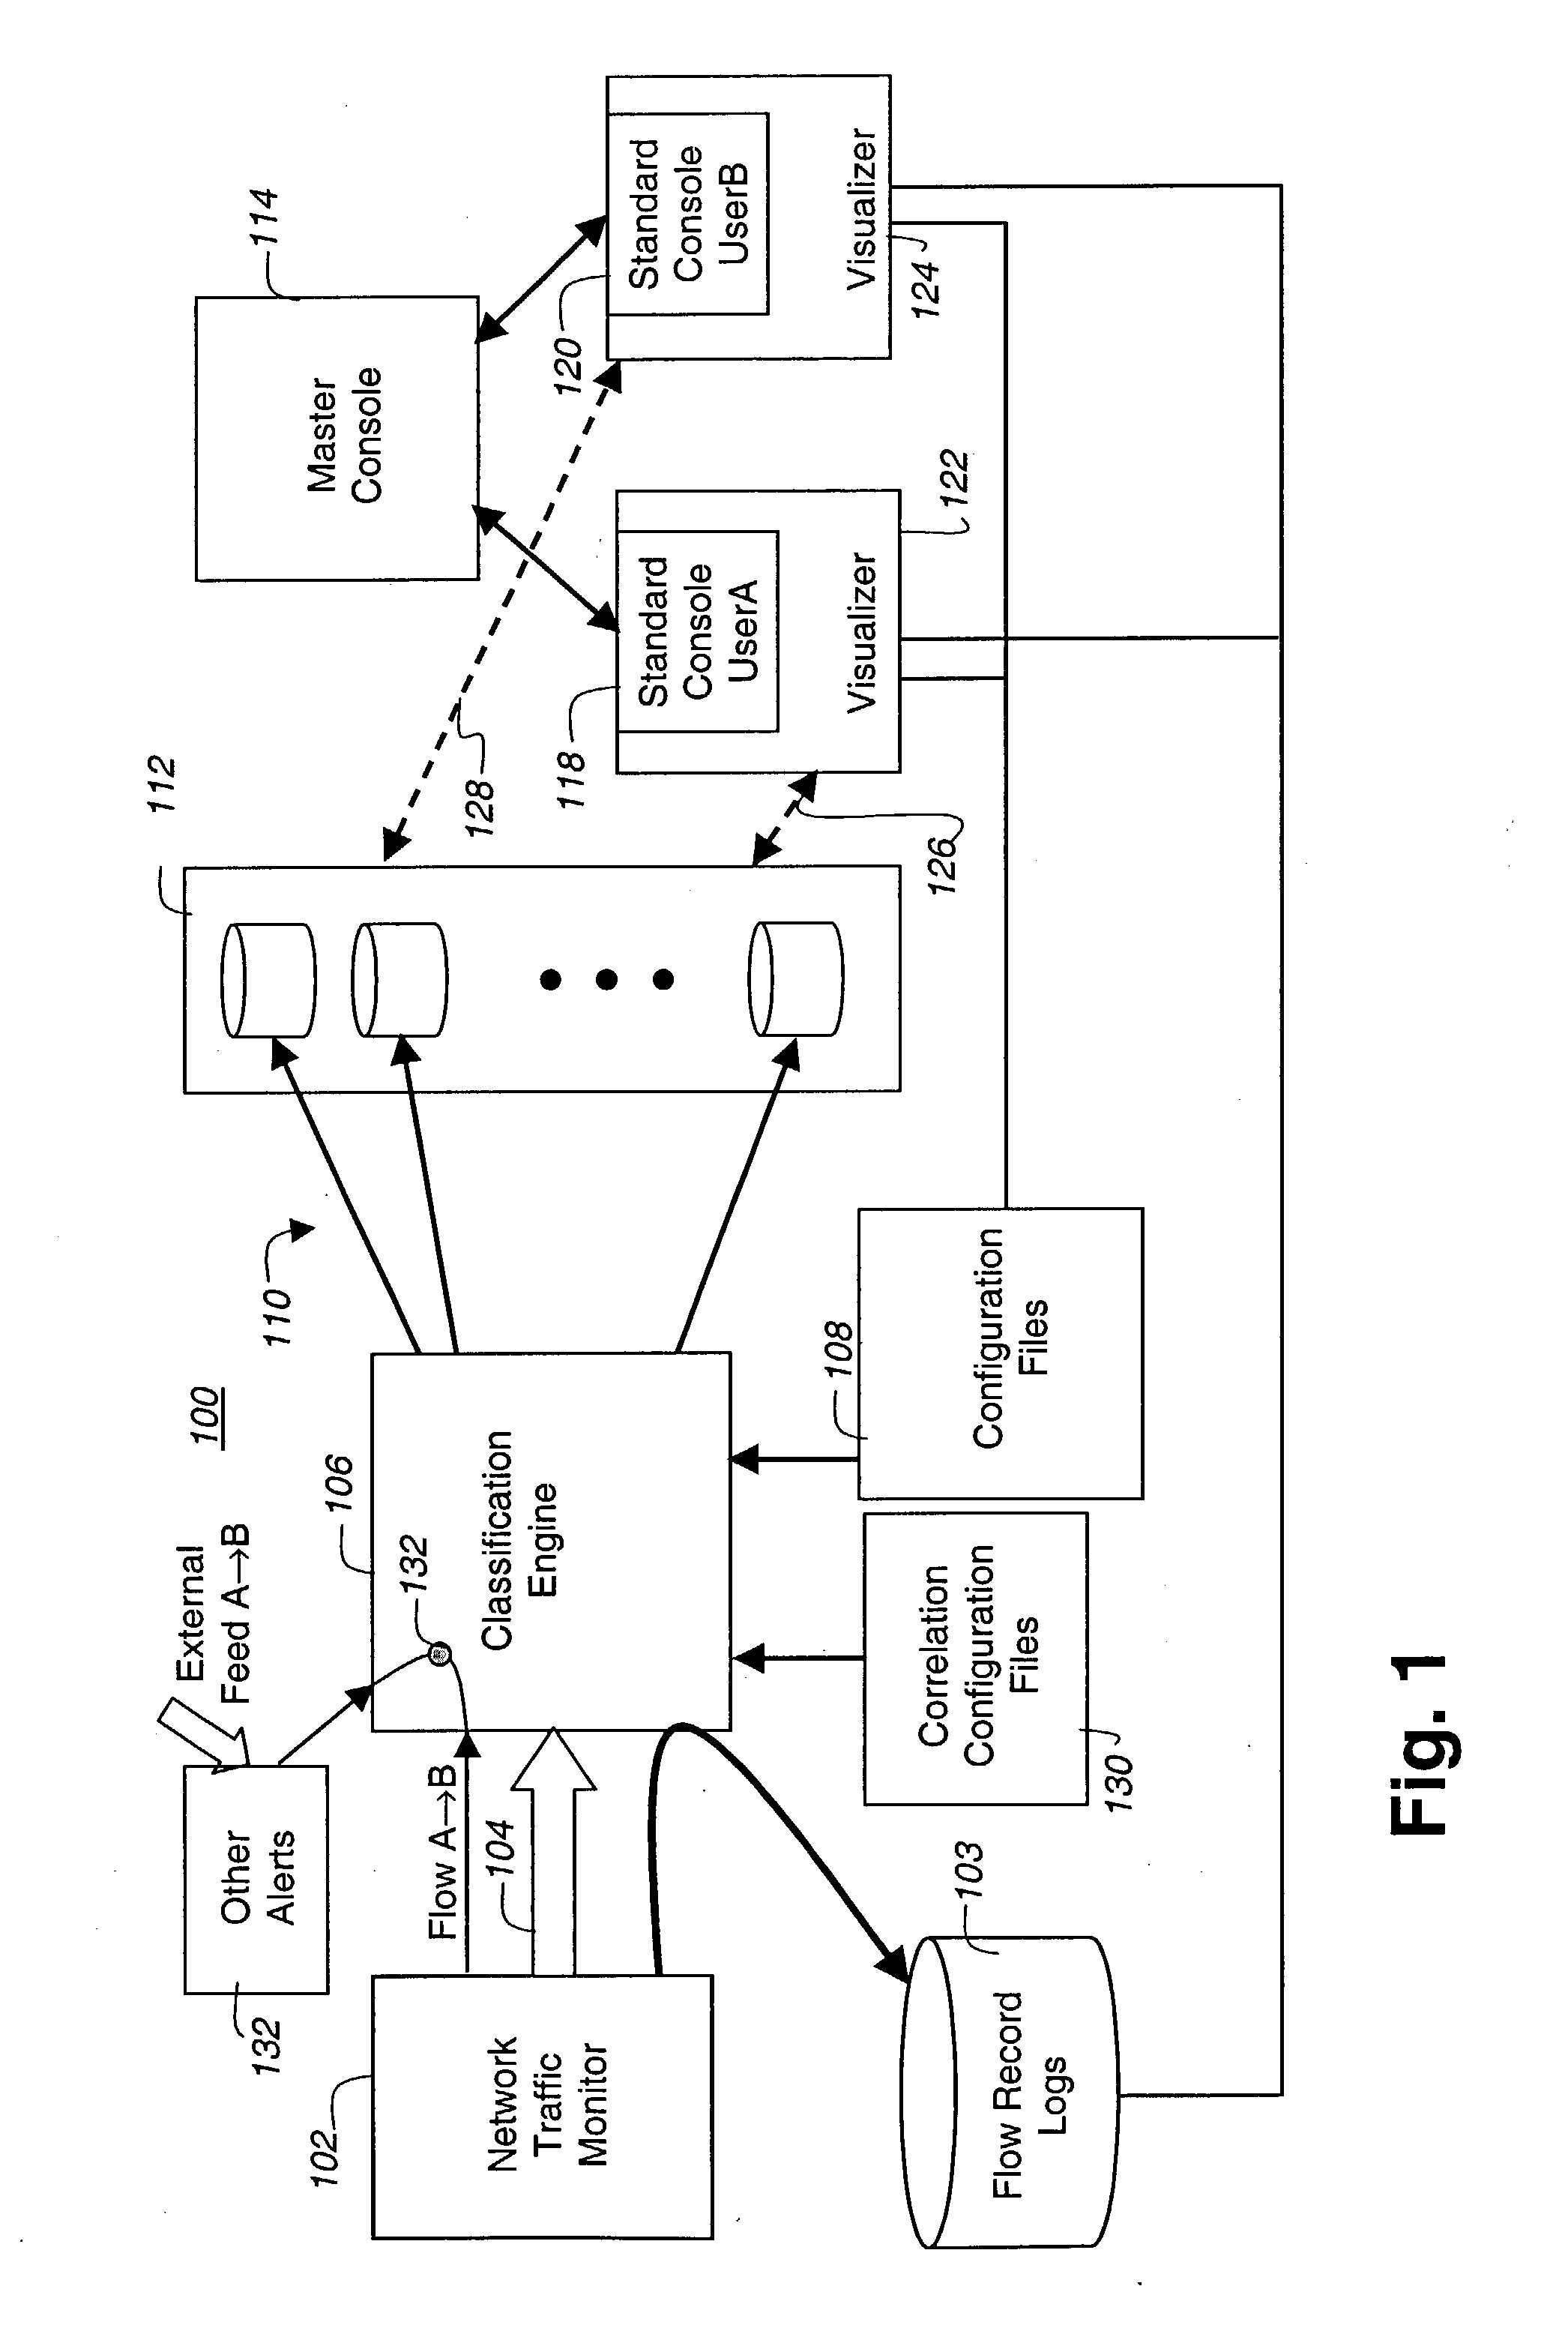 Method and apparatus for correlating network activity through visualizing network data